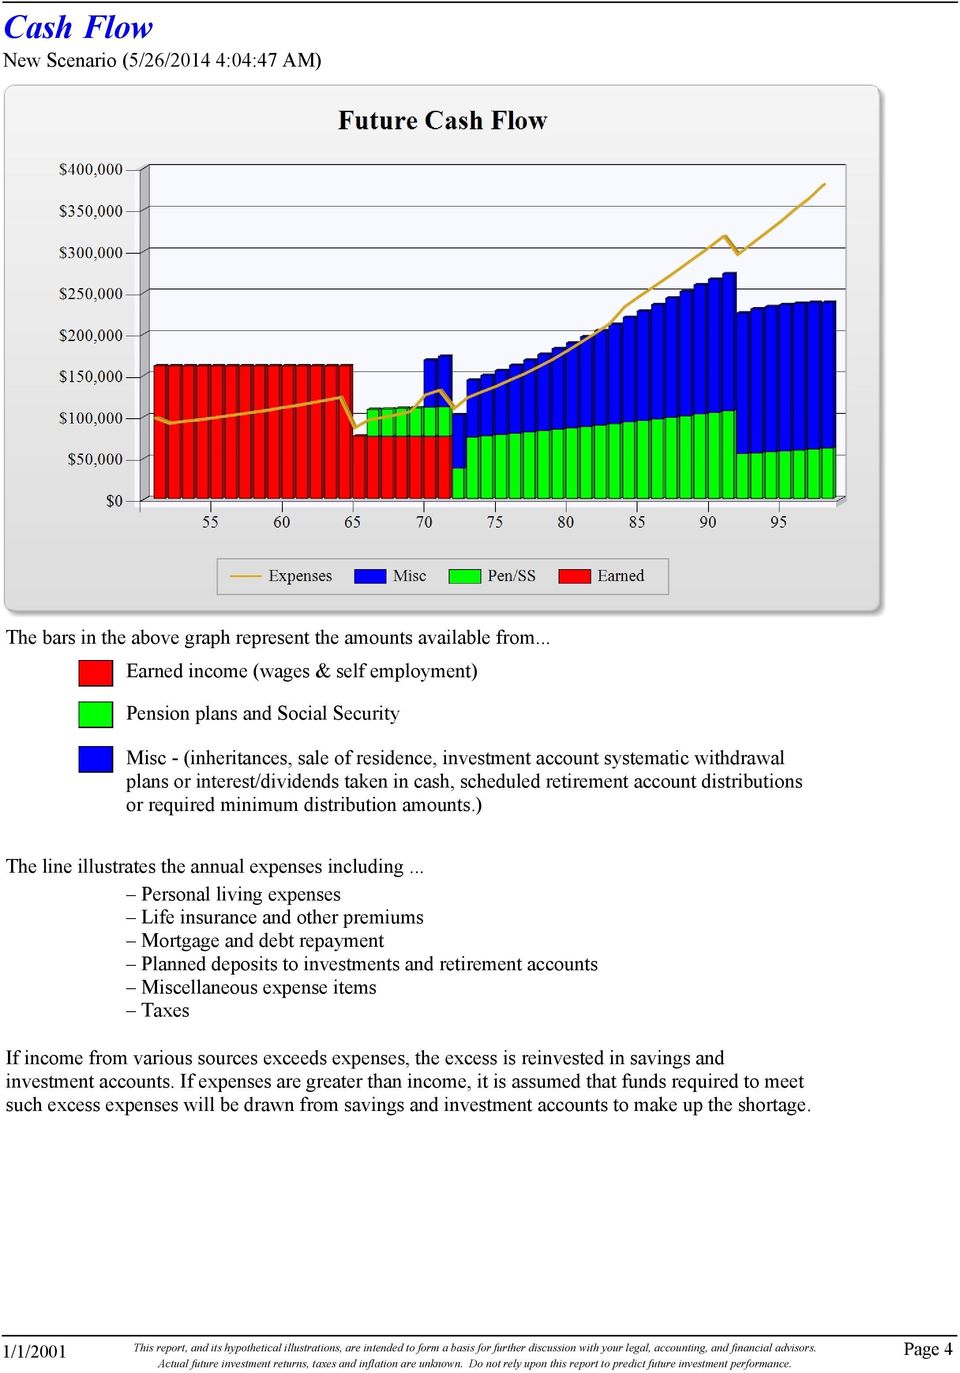 cash, scheduled retirement account distributions or required minimum distribution amounts.) The line illustrates the annual expenses including.